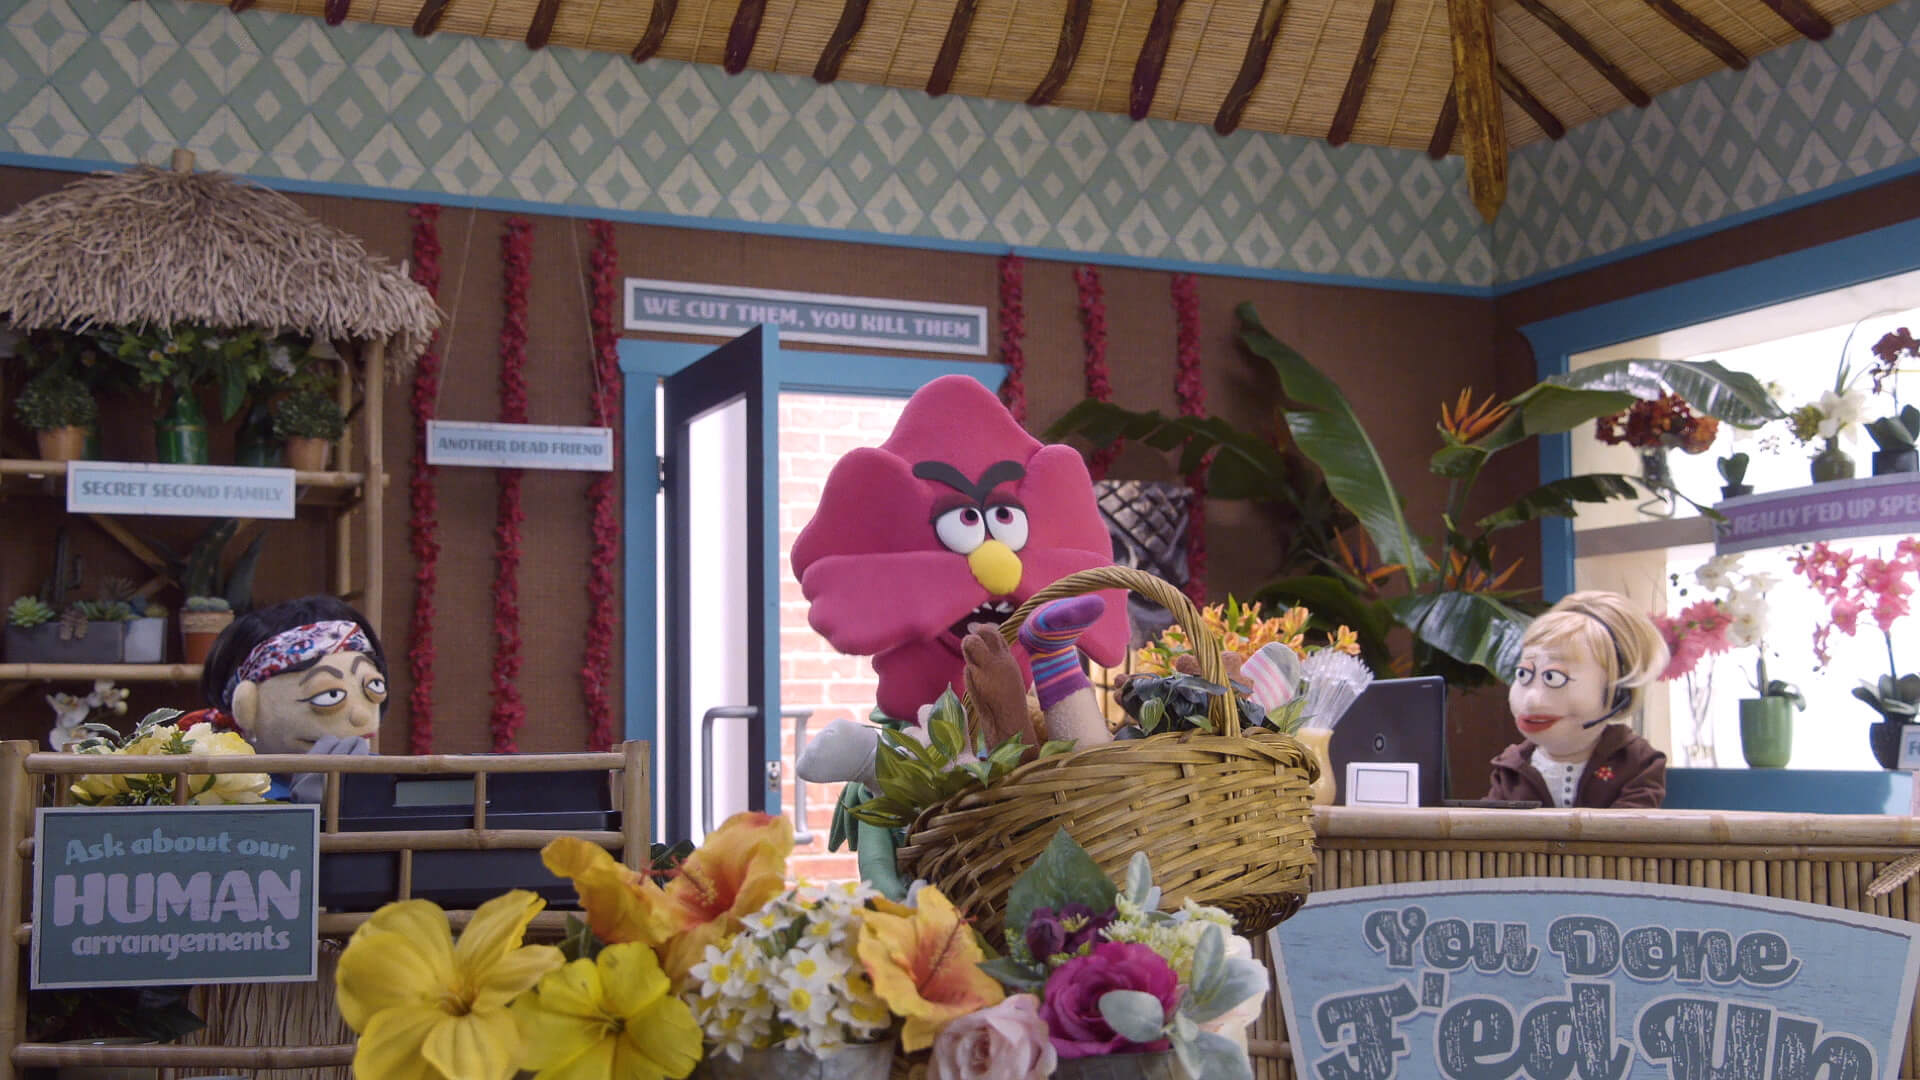 An angry flower stomps into a flower shop on Comedy Central's Crank Yankers